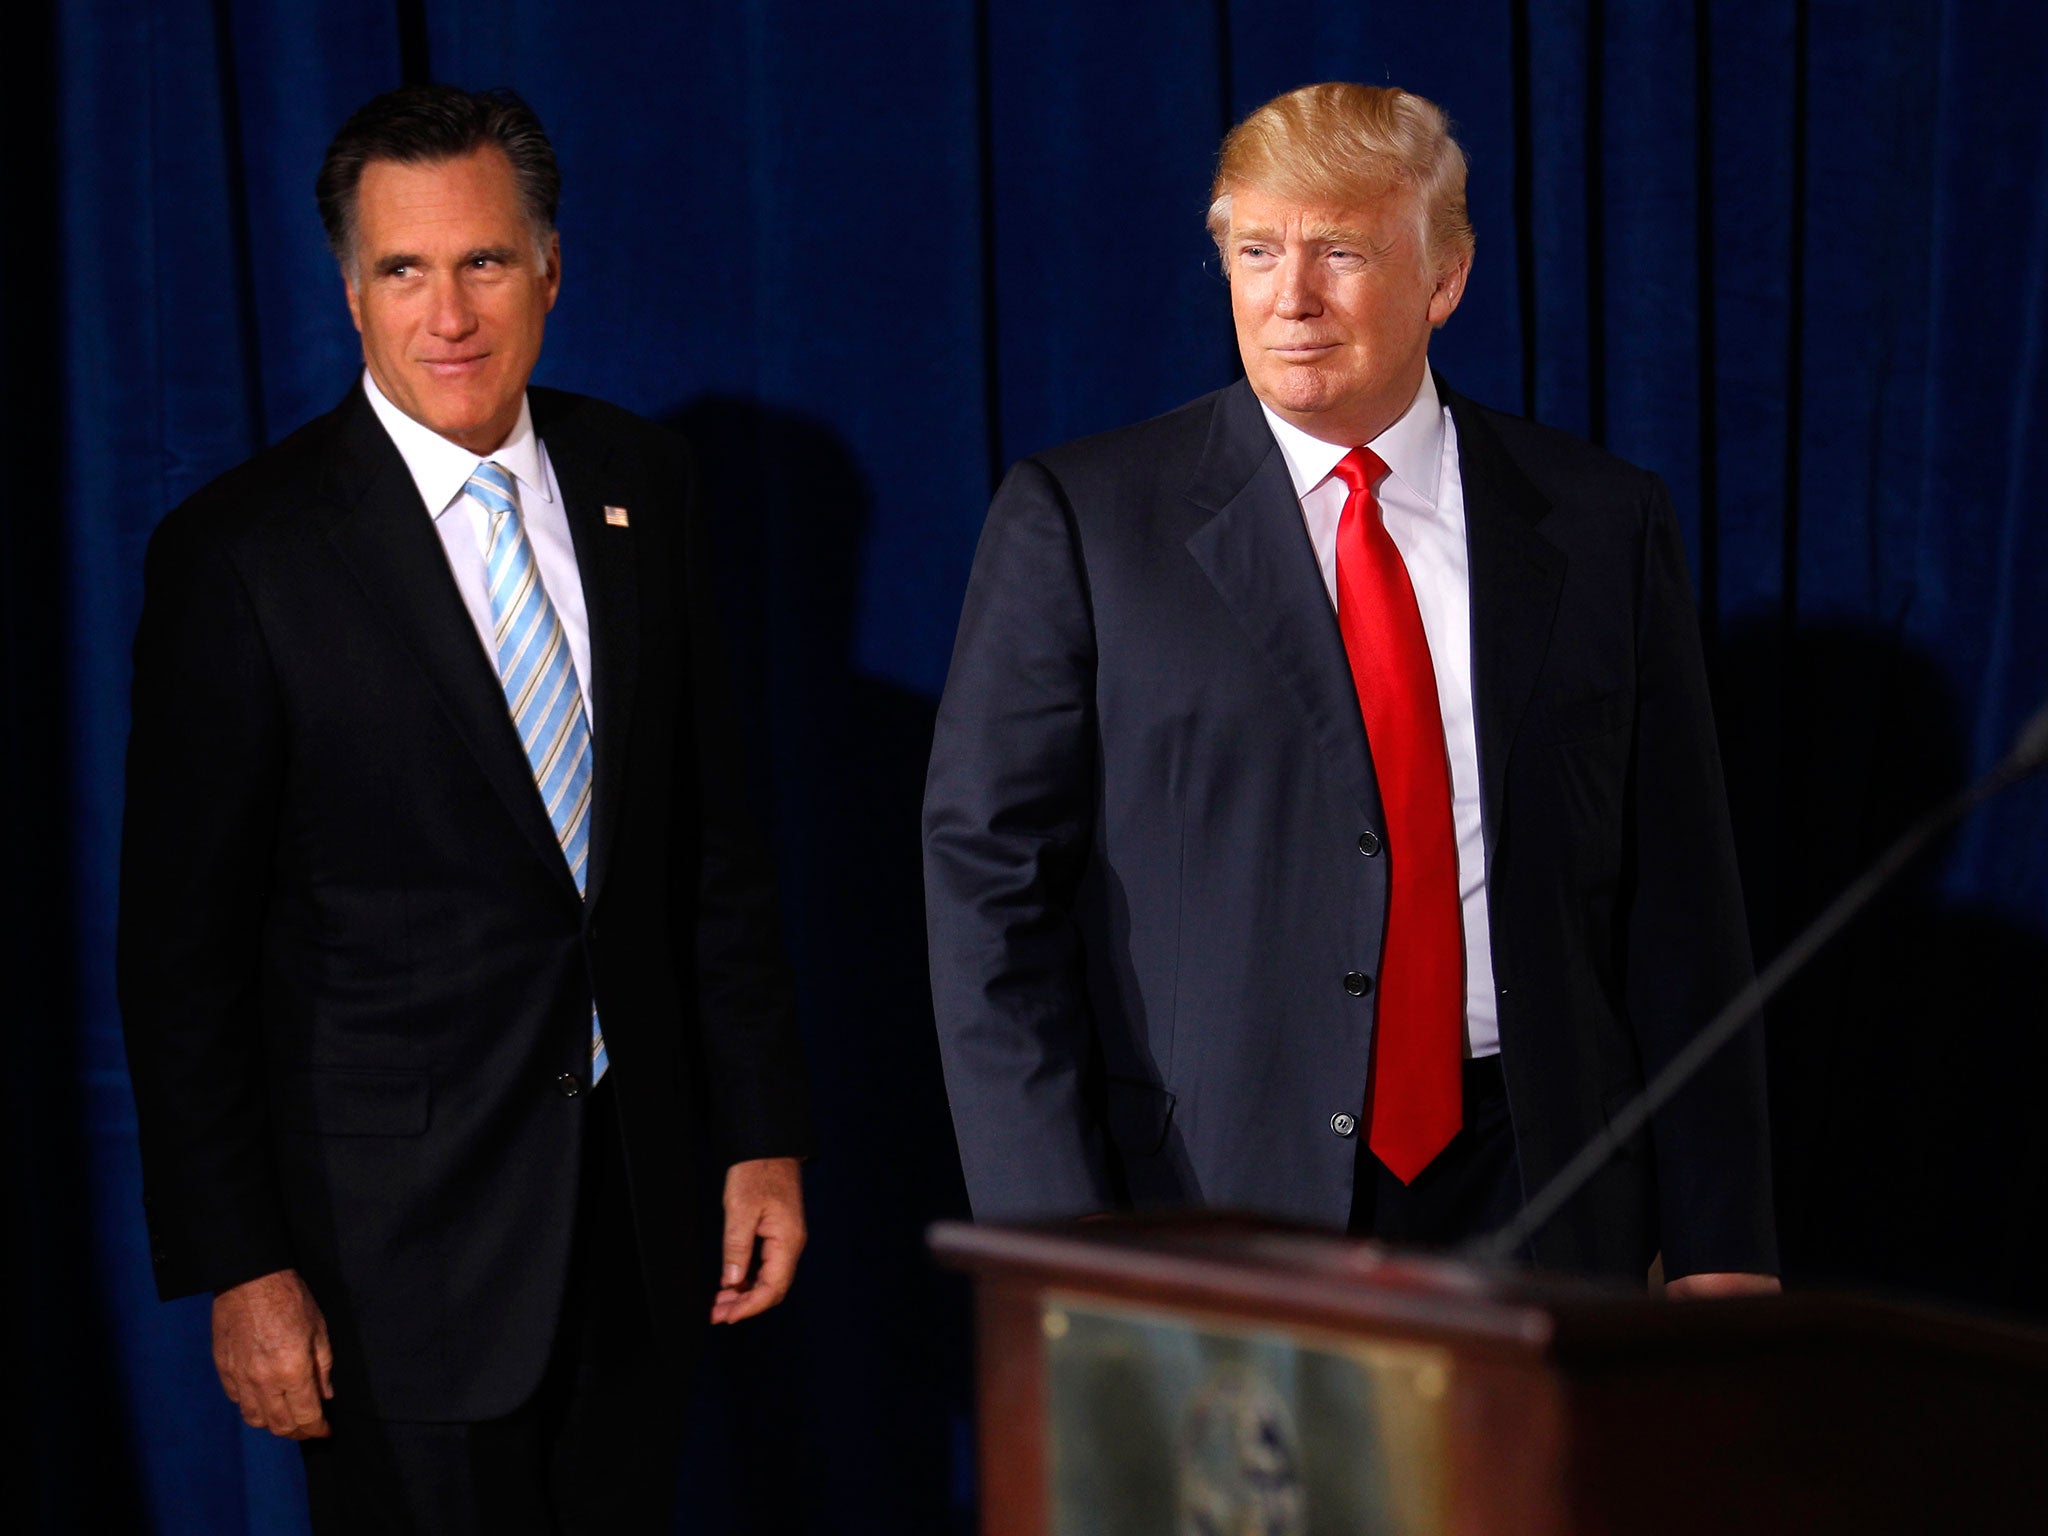 Mitt Romney and Donald Trump worked together four years ago, when the then Republican presidential candidate received public backing from the New York property magnate